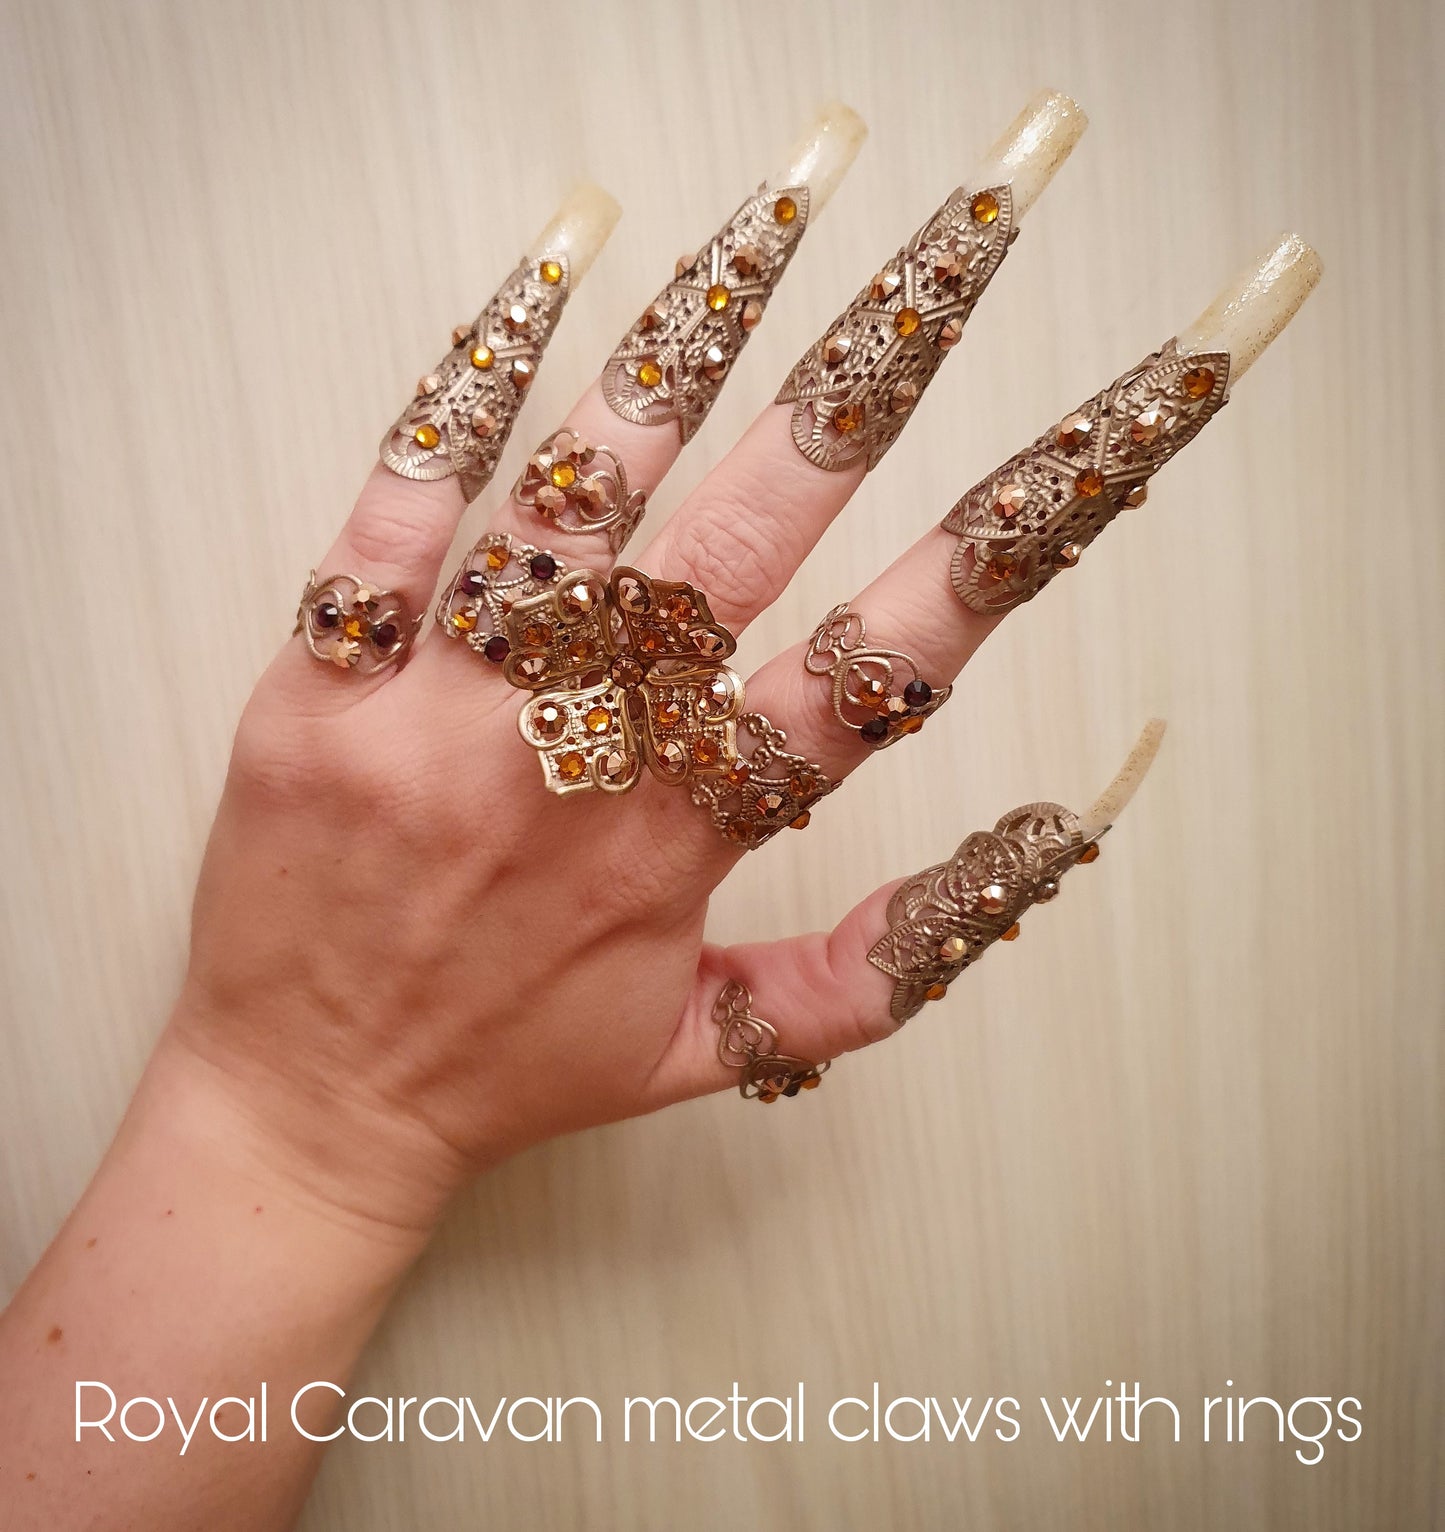 The Royal Caravan metal claws with ring in pale antique gold (set of 5 claws)